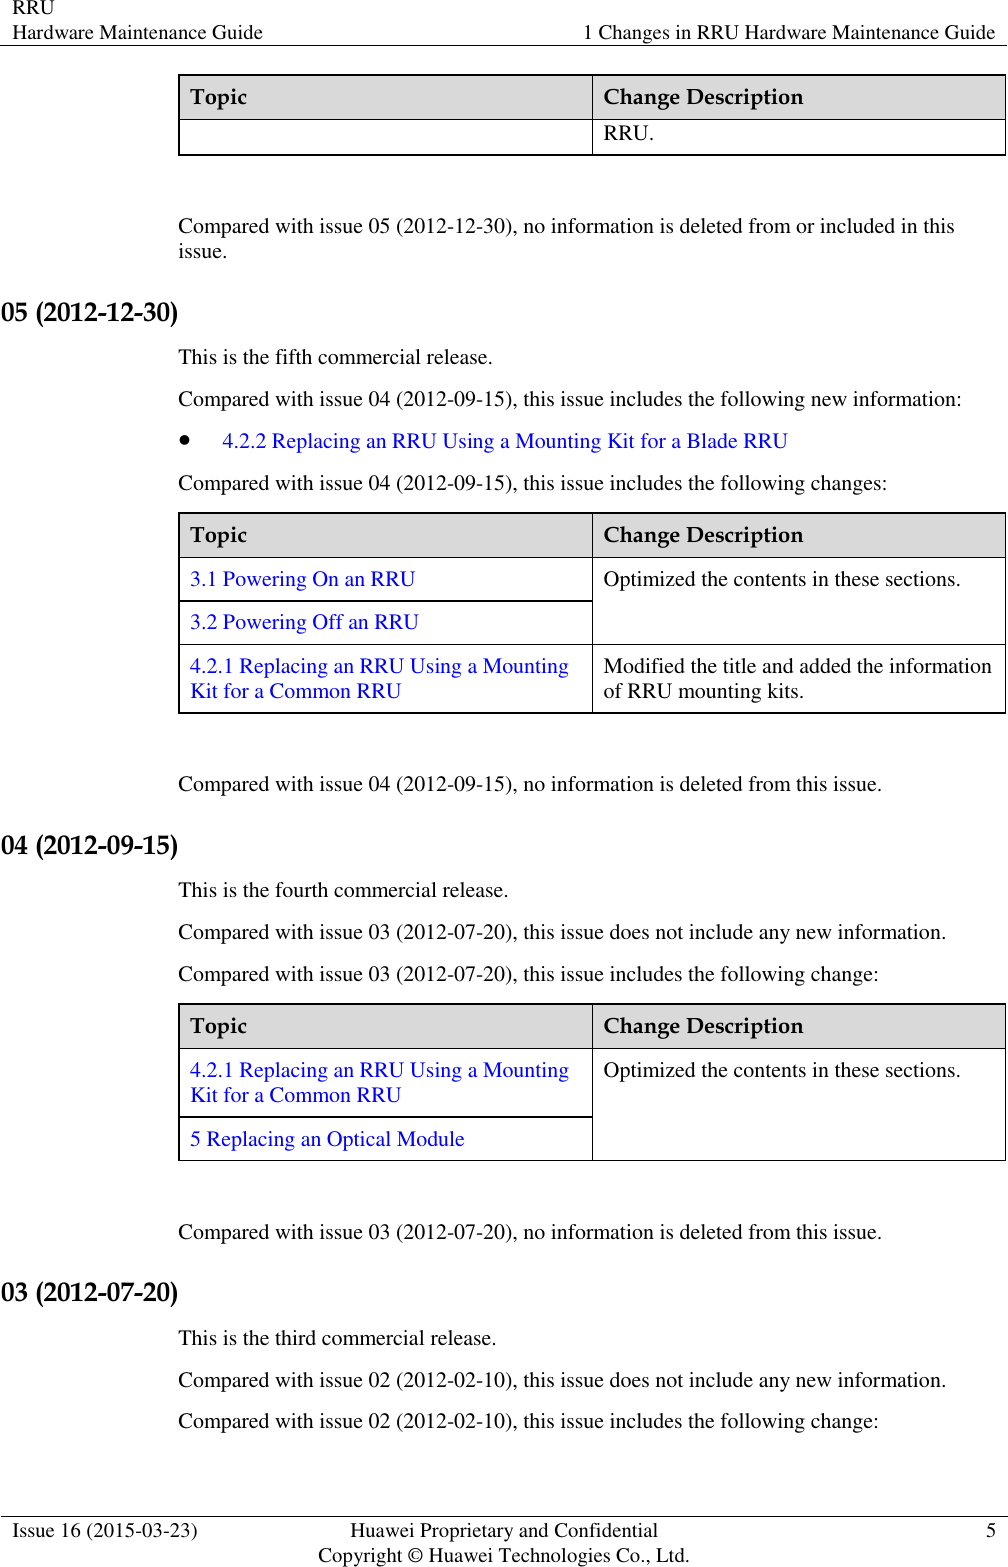 RRU Hardware Maintenance Guide 1 Changes in RRU Hardware Maintenance Guide  Issue 16 (2015-03-23) Huawei Proprietary and Confidential                                     Copyright © Huawei Technologies Co., Ltd. 5  Topic Change Description RRU.  Compared with issue 05 (2012-12-30), no information is deleted from or included in this issue. 05 (2012-12-30) This is the fifth commercial release. Compared with issue 04 (2012-09-15), this issue includes the following new information:  4.2.2 Replacing an RRU Using a Mounting Kit for a Blade RRU Compared with issue 04 (2012-09-15), this issue includes the following changes: Topic Change Description 3.1 Powering On an RRU Optimized the contents in these sections. 3.2 Powering Off an RRU 4.2.1 Replacing an RRU Using a Mounting Kit for a Common RRU Modified the title and added the information of RRU mounting kits.  Compared with issue 04 (2012-09-15), no information is deleted from this issue. 04 (2012-09-15) This is the fourth commercial release. Compared with issue 03 (2012-07-20), this issue does not include any new information. Compared with issue 03 (2012-07-20), this issue includes the following change: Topic Change Description 4.2.1 Replacing an RRU Using a Mounting Kit for a Common RRU Optimized the contents in these sections. 5 Replacing an Optical Module  Compared with issue 03 (2012-07-20), no information is deleted from this issue. 03 (2012-07-20) This is the third commercial release. Compared with issue 02 (2012-02-10), this issue does not include any new information. Compared with issue 02 (2012-02-10), this issue includes the following change: 